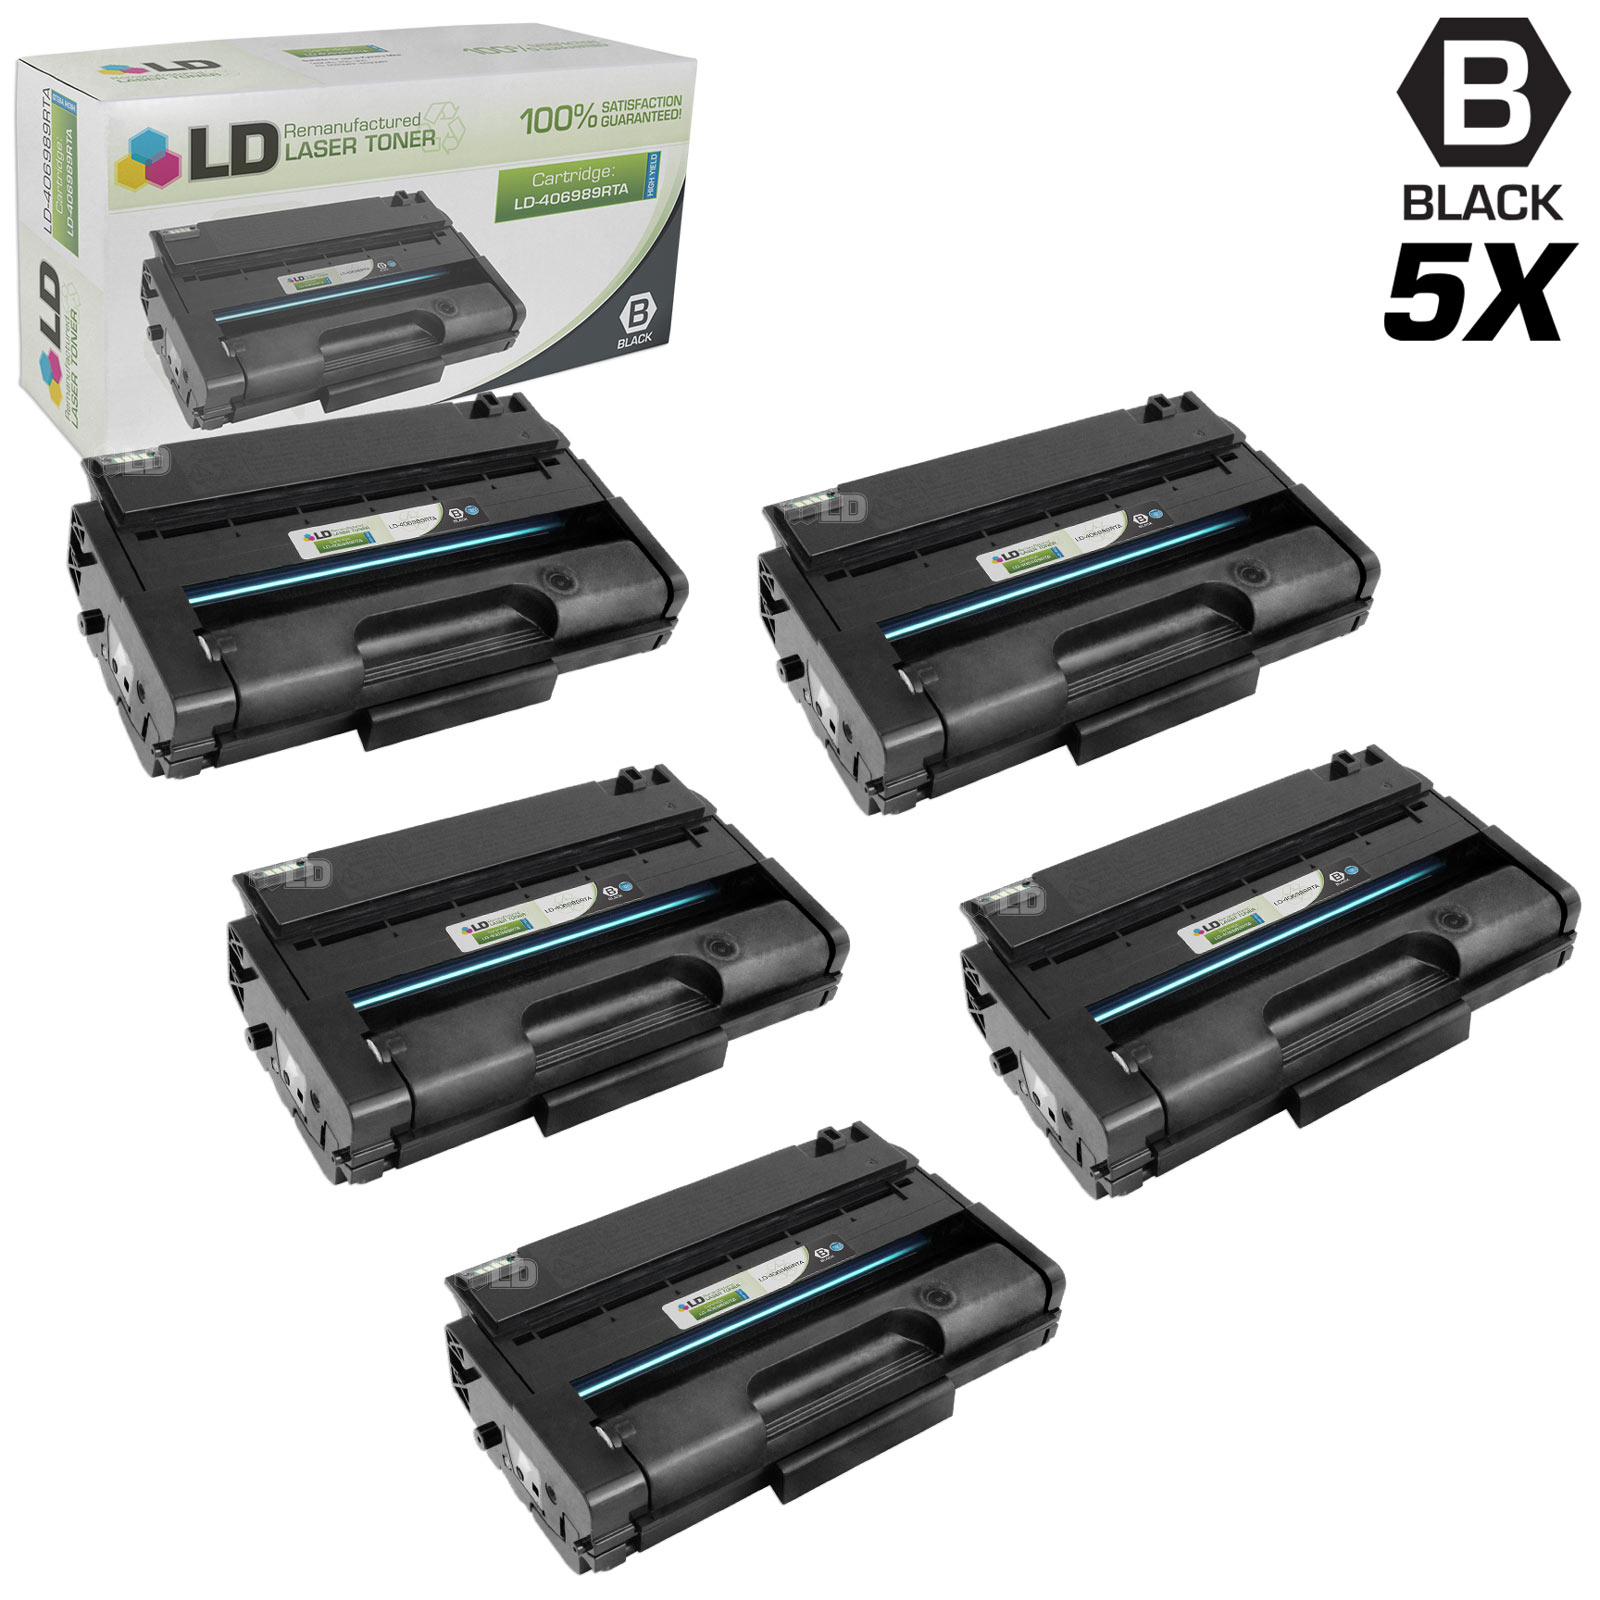 Remanufactured Replacements for Ricoh 406989 Set of 5 High Yie Black Laser Toner Cartridges for use in Ricoh Aficio SP 3500DN, SP 3500N, SP 3500SF, SP 3510DN, and SP 3510SF s - image 1 of 1